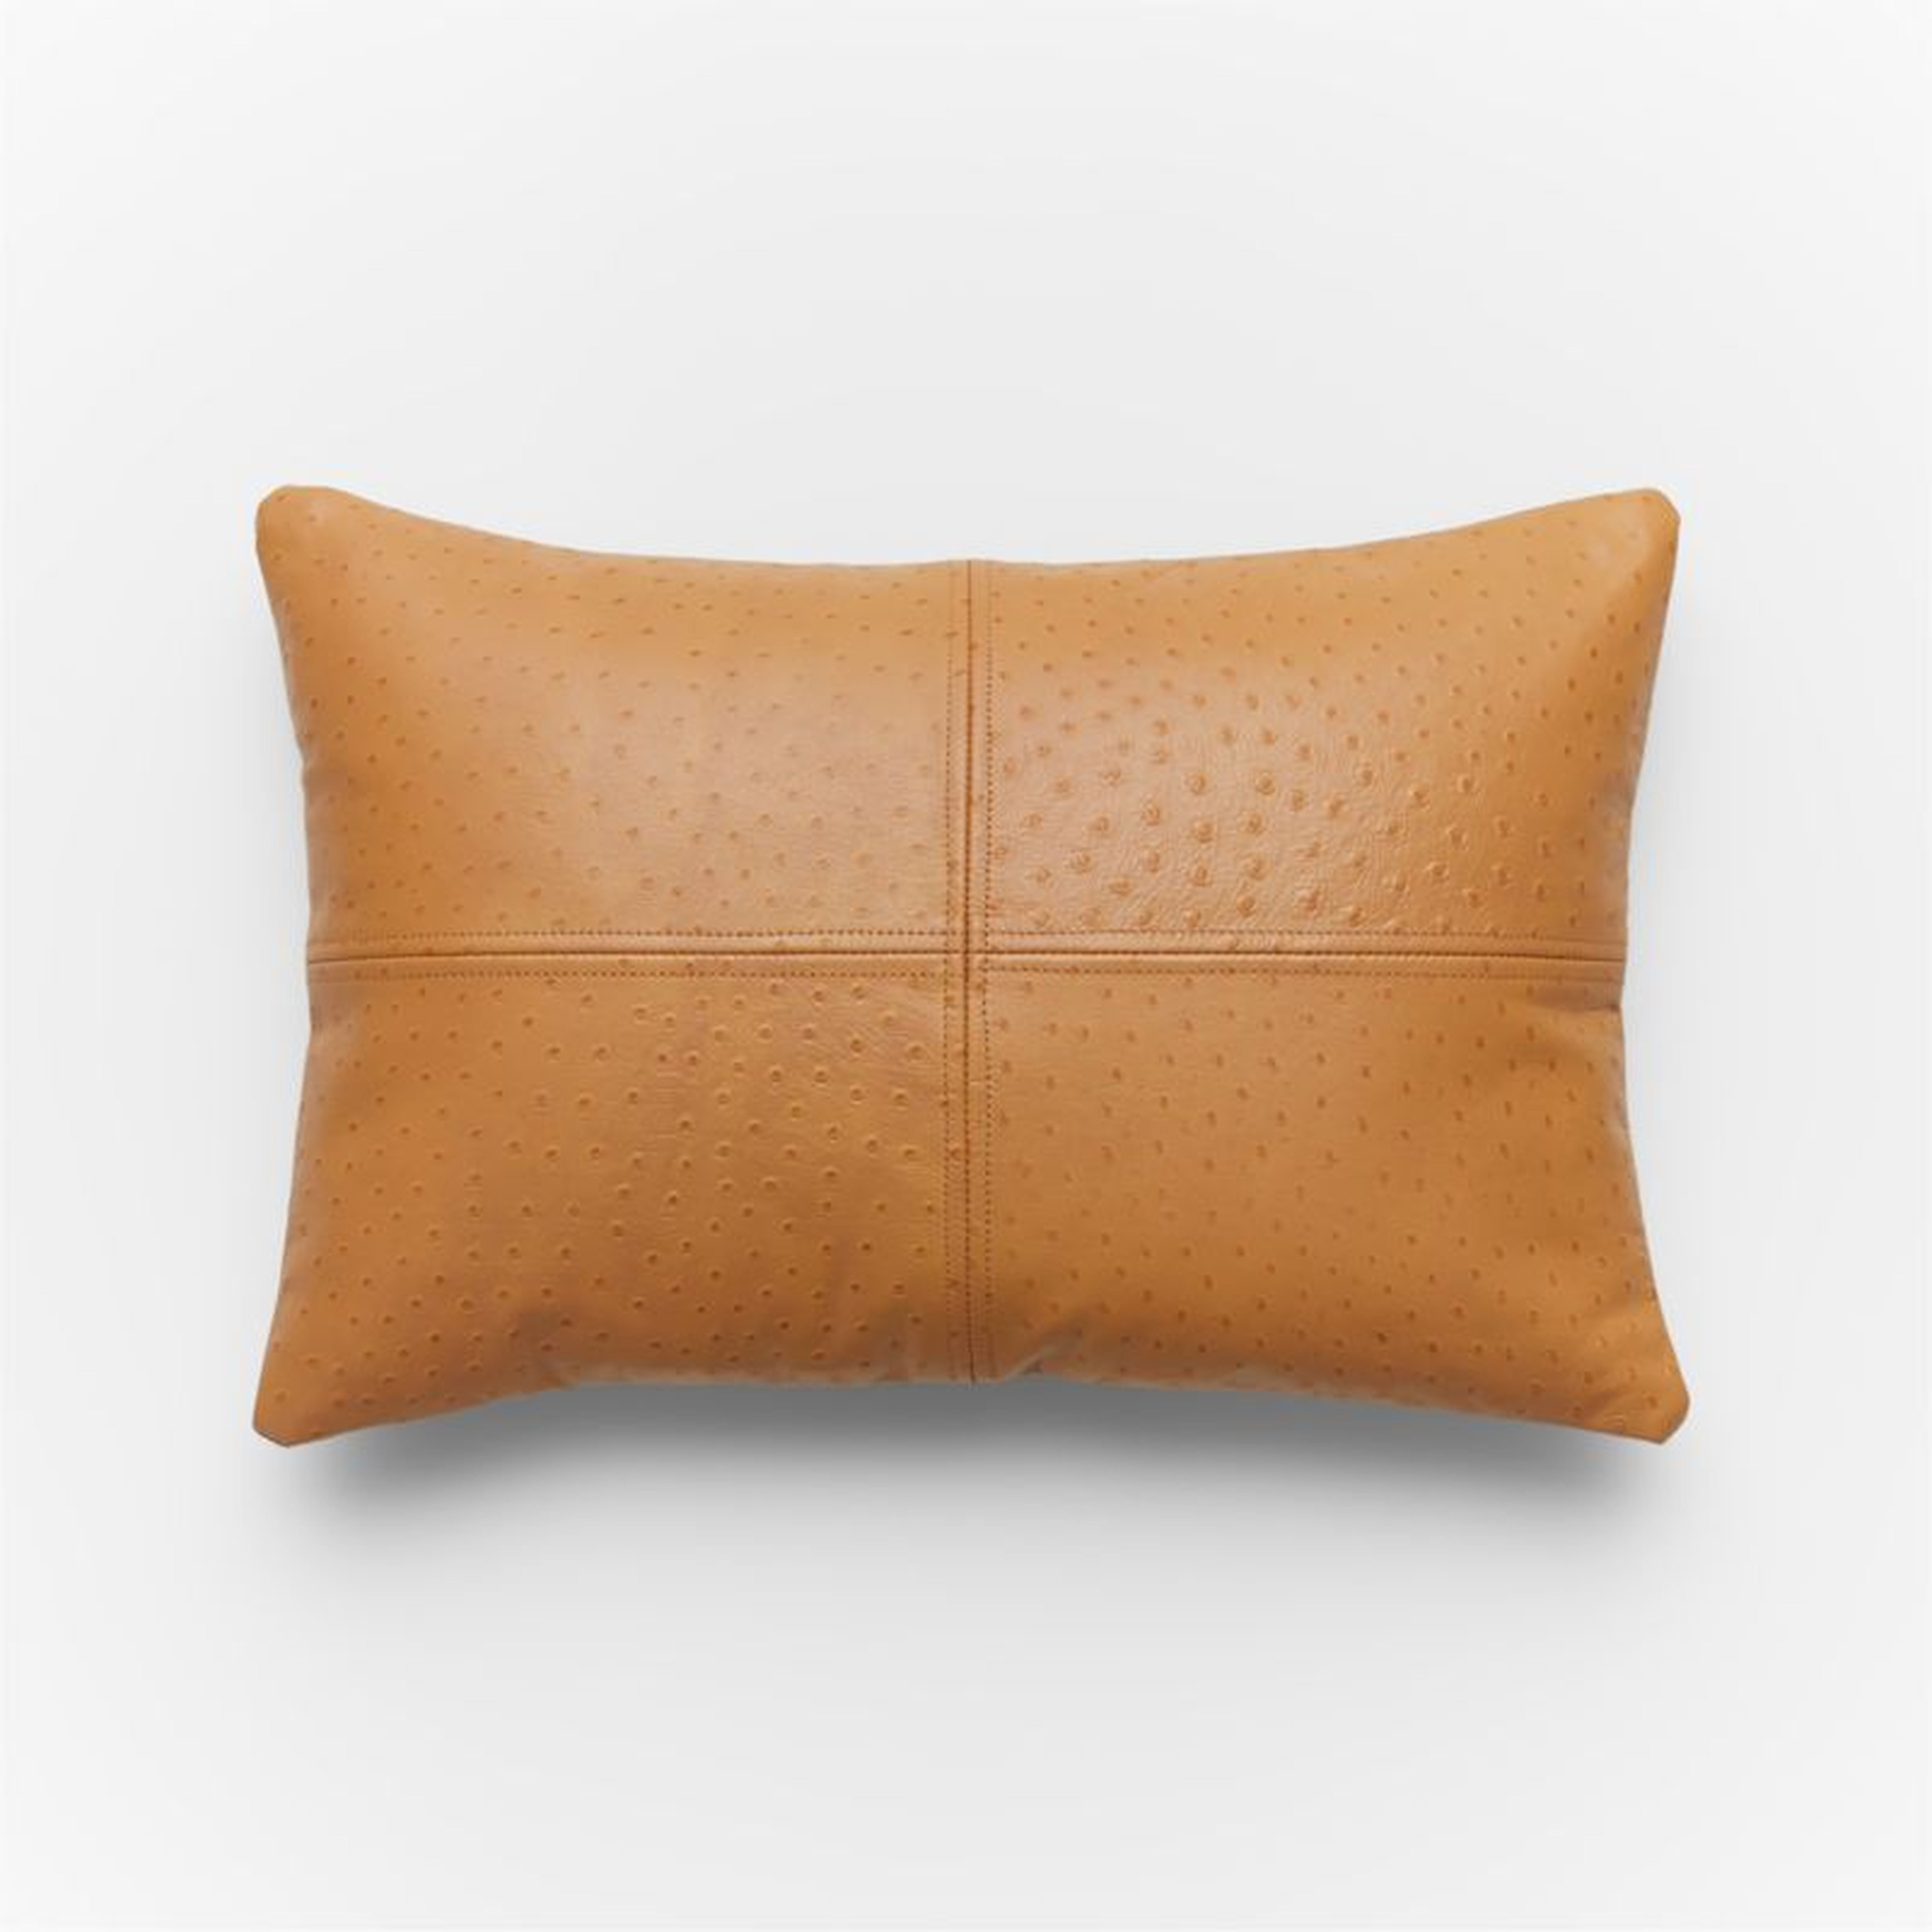 Rue Tan Leather Throw Pillow with Down-Alternative Insert 18"x12" - CB2